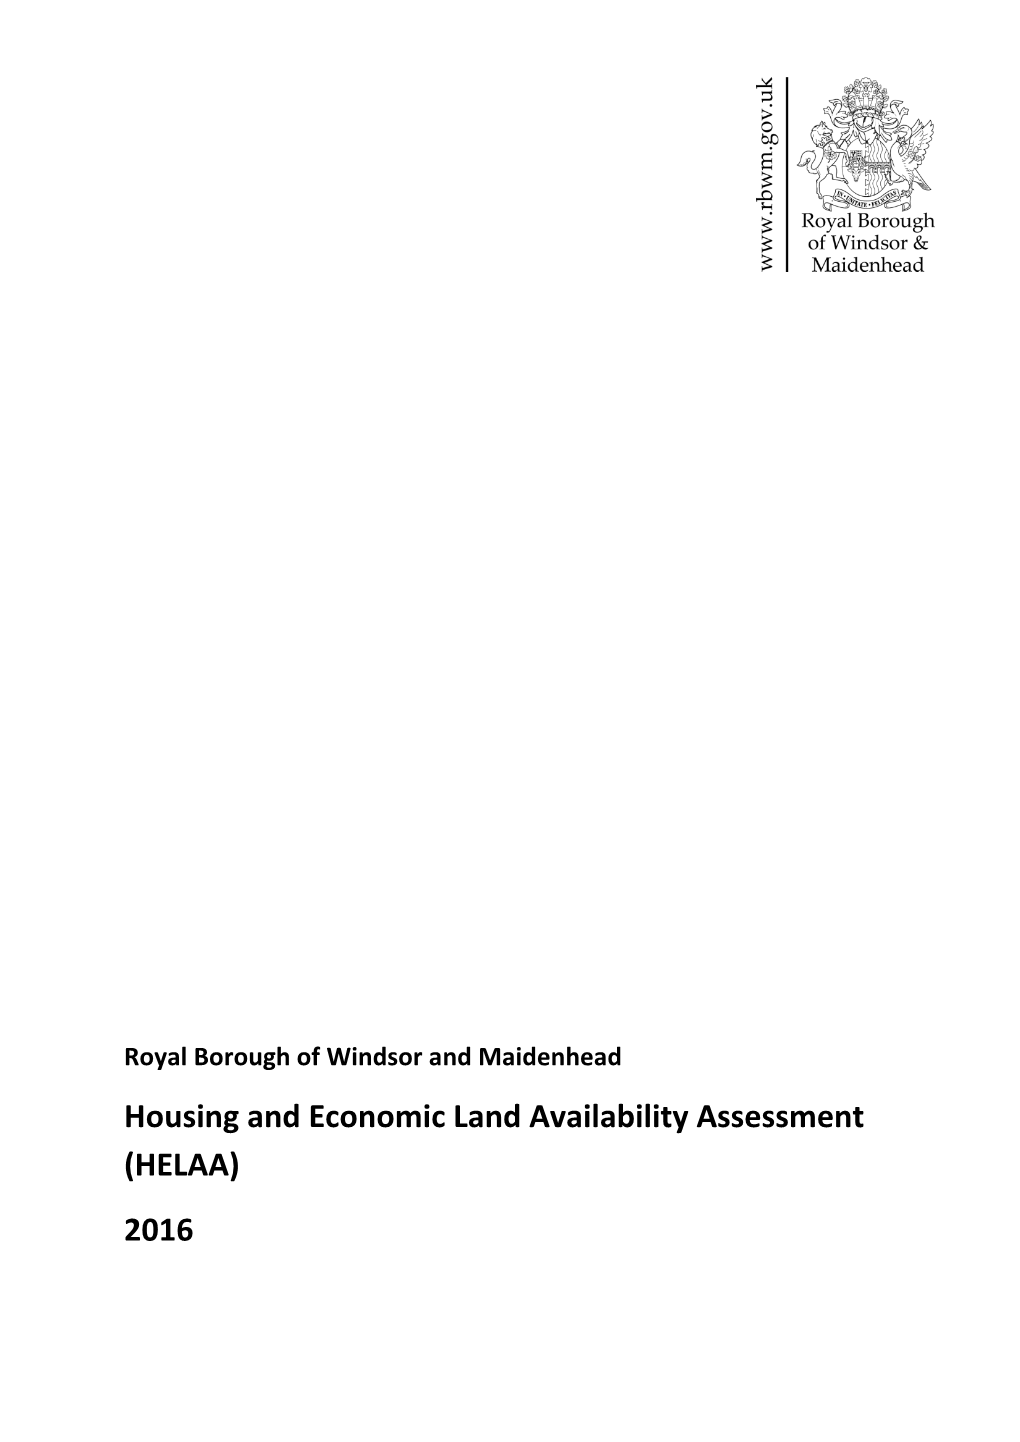 Housing and Economic Land Availability Assessment (HELAA) 2016